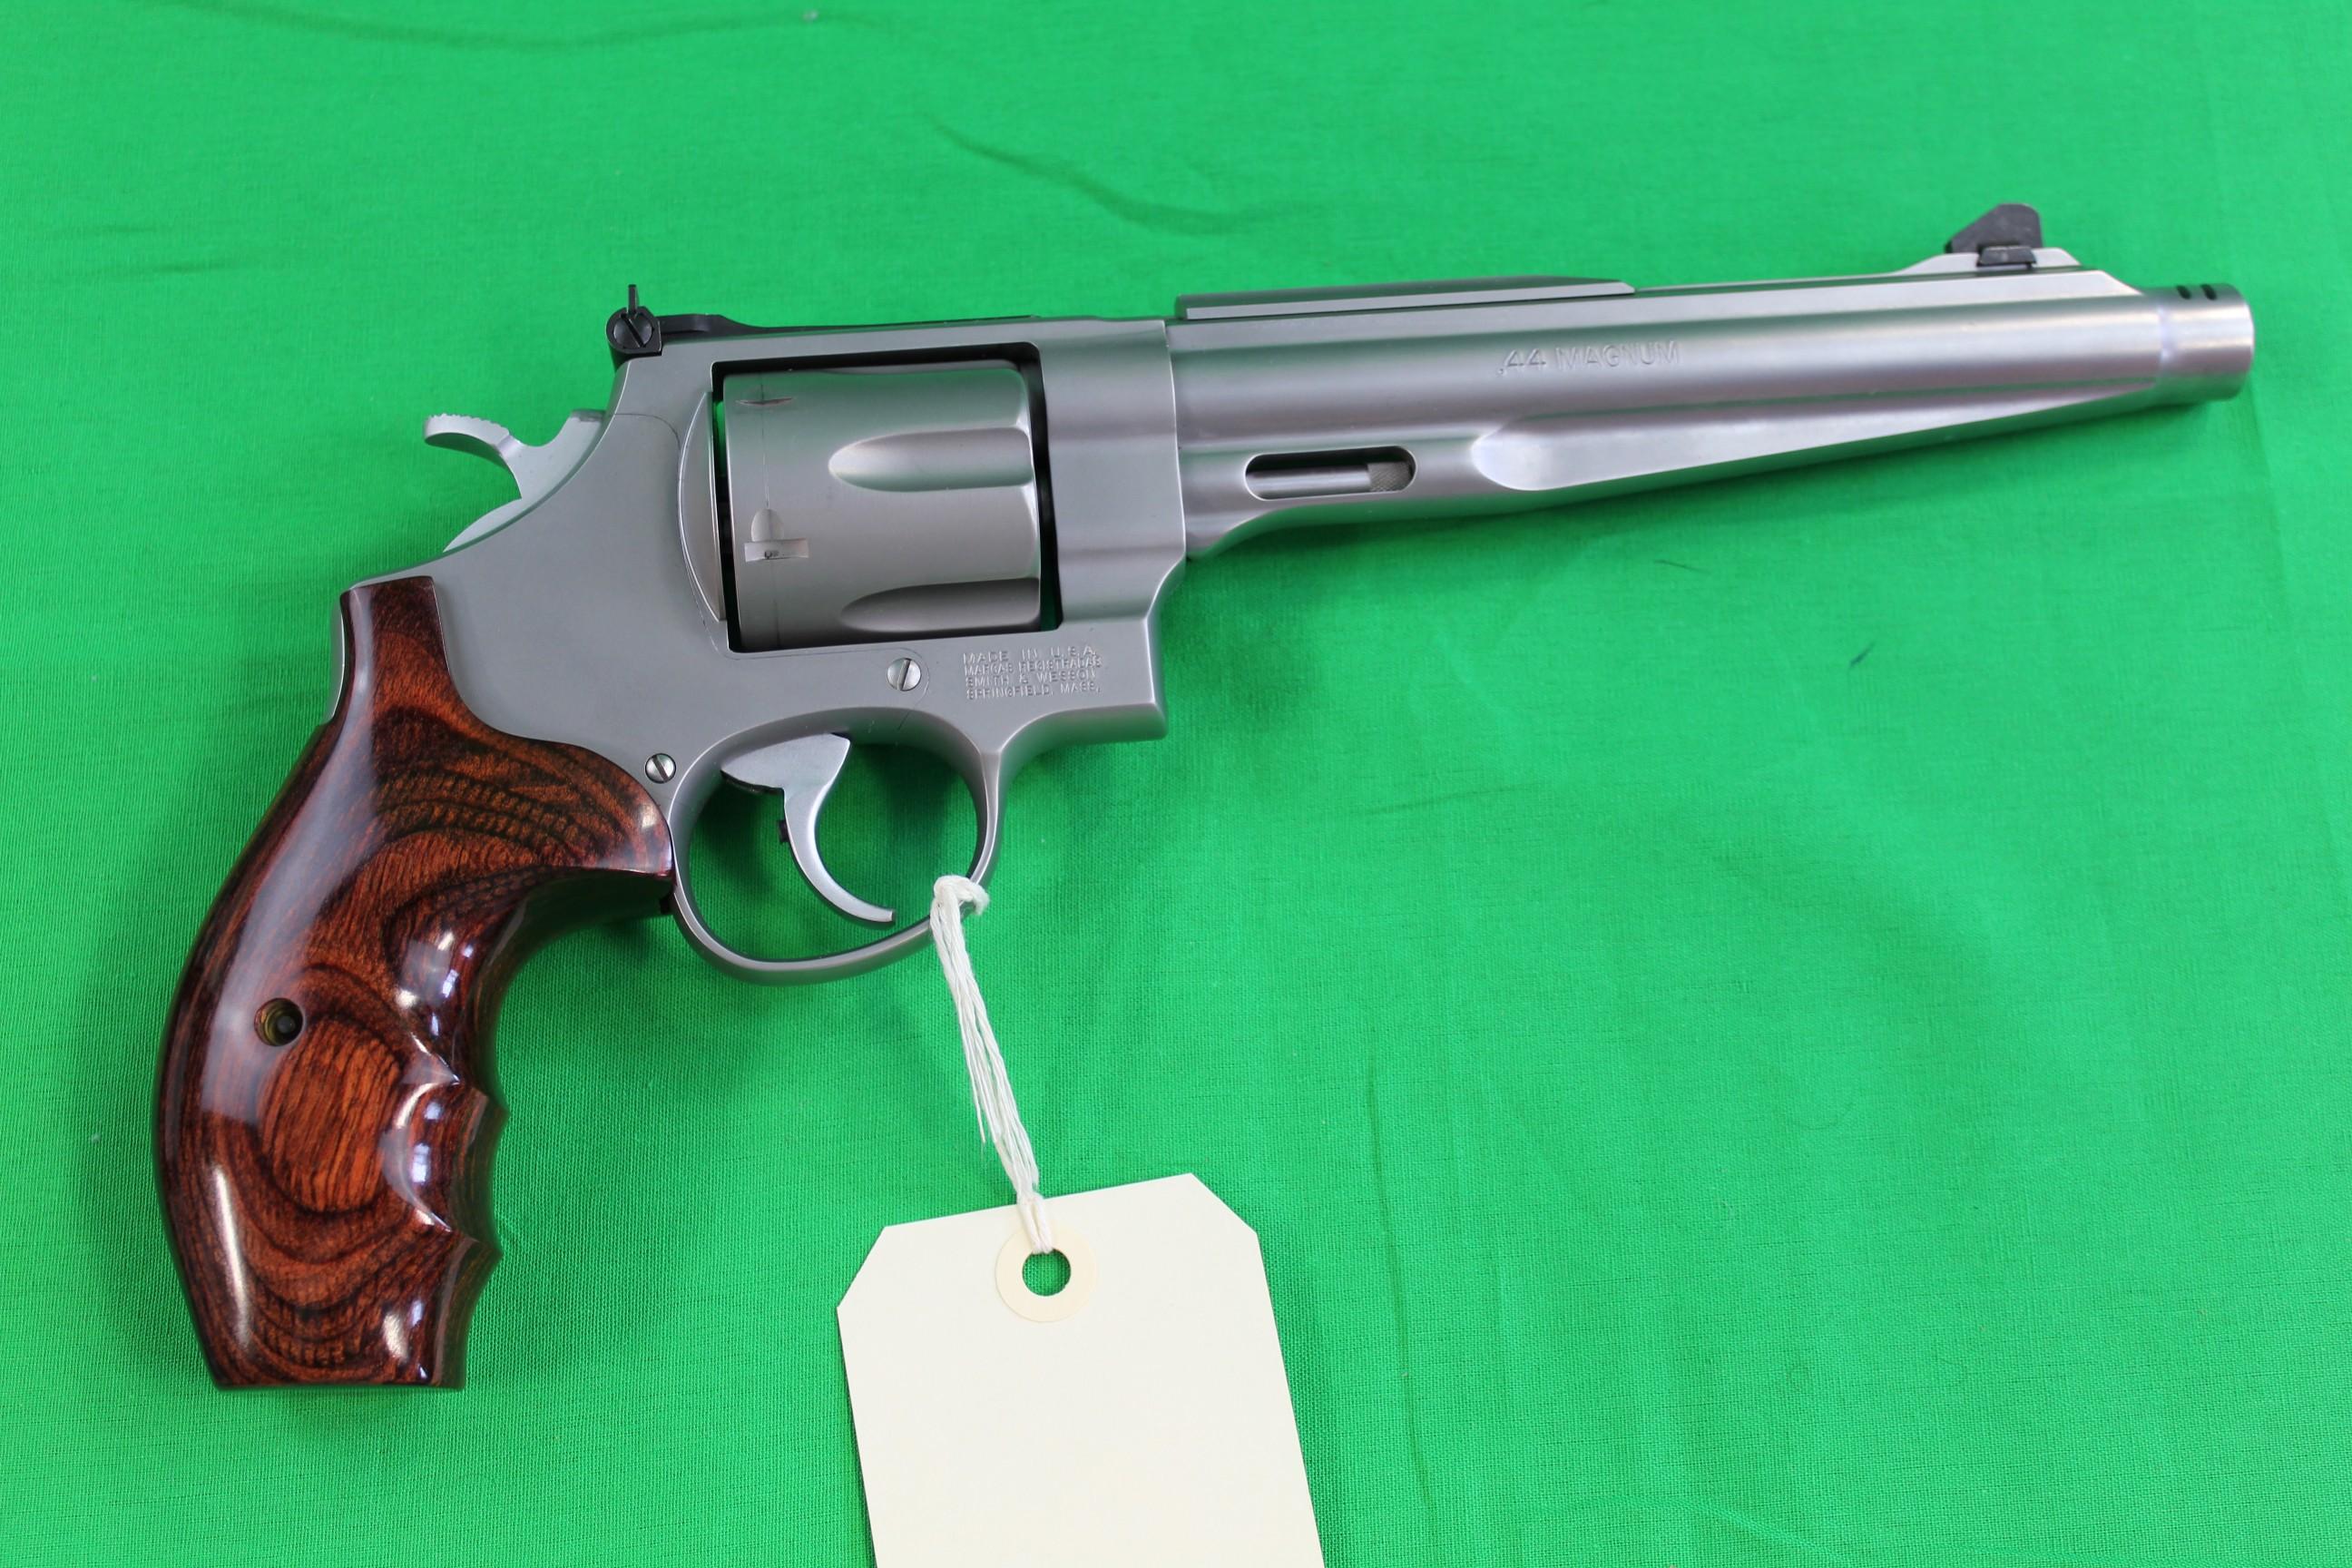 Smith & Wesson Model 629-6 Performance Center .44 Magnum Revolver, s/n HAA0259